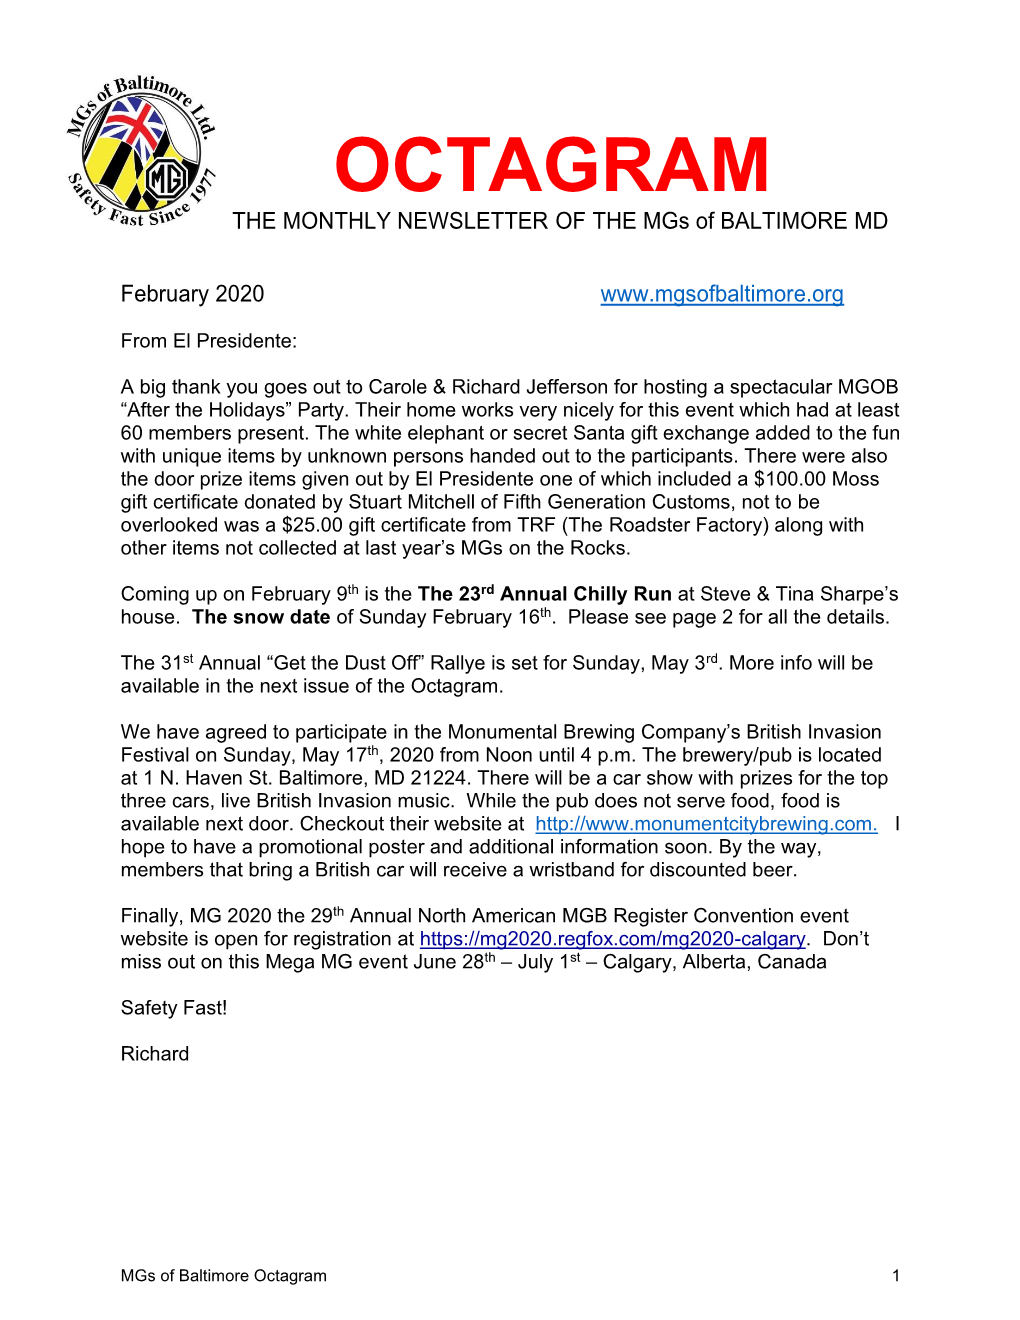 OCTAGRAM the MONTHLY NEWSLETTER of the Mgs of BALTIMORE MD